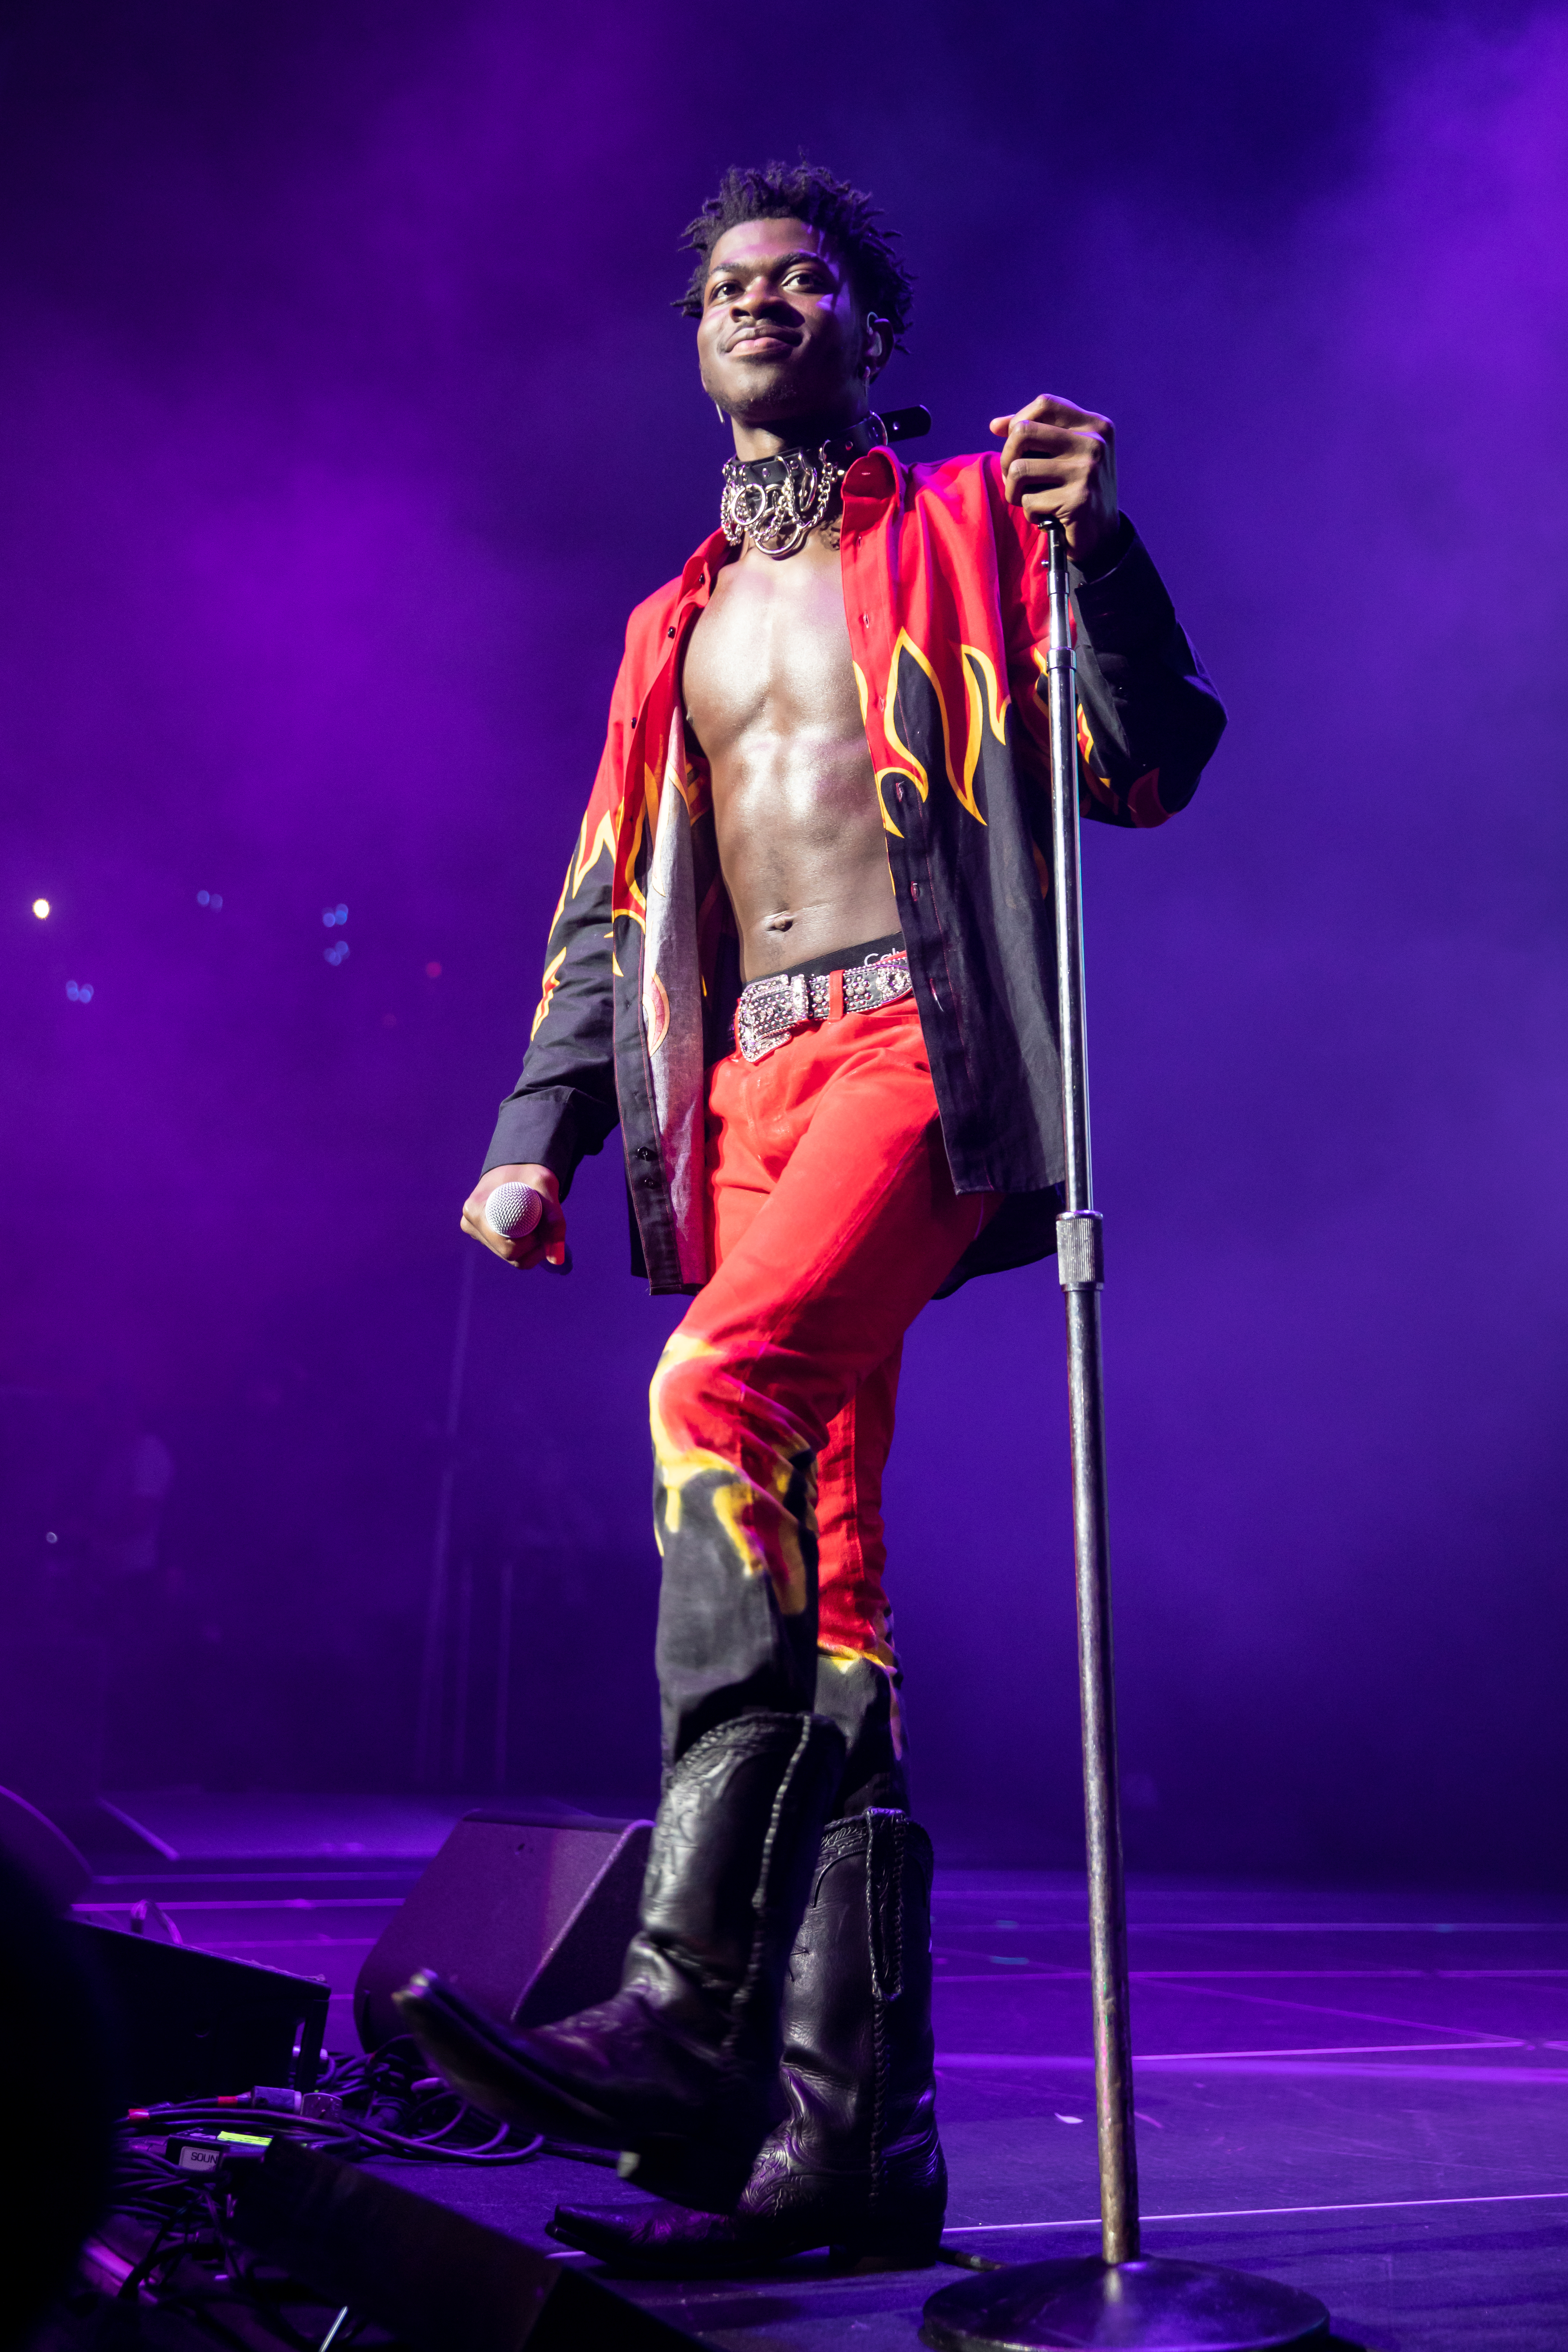 Close-up of Lil Nas performing onstage